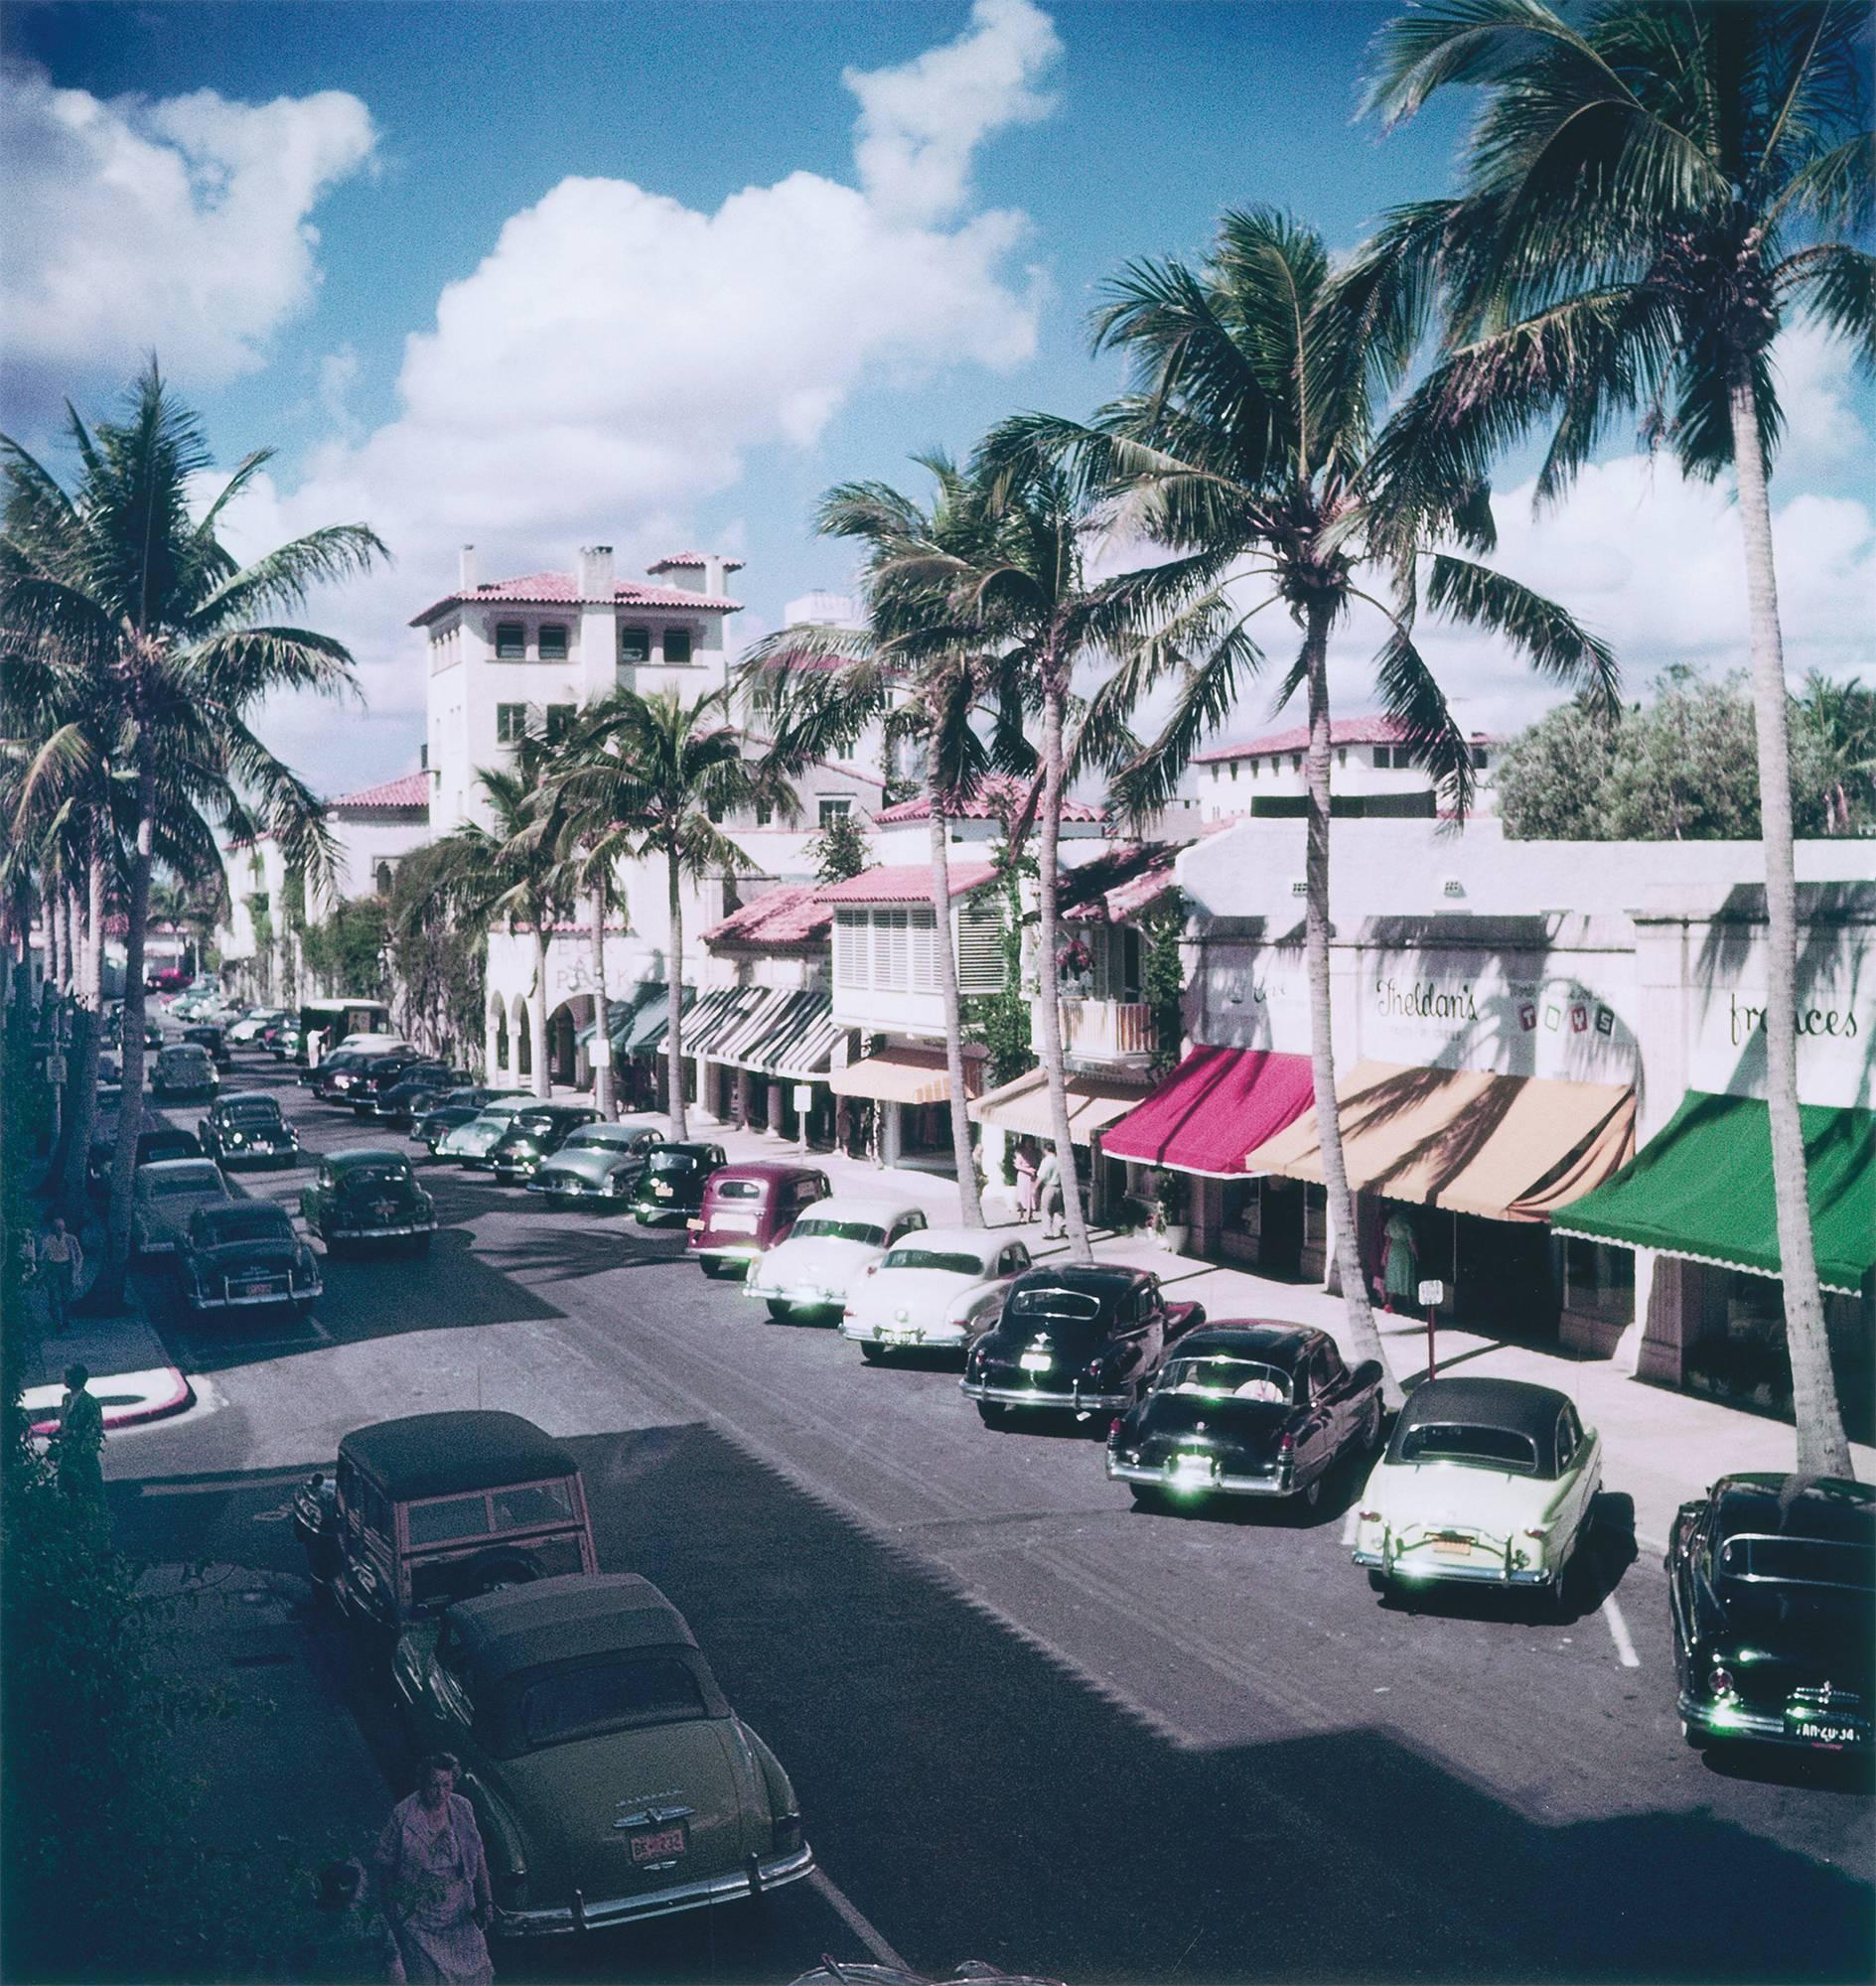 Cars parked on a tree-lined street in Palm Beach, Florida, circa 1953. 
C print
16 x 16 inches
Framed

Estate stamped and hand numbered edition of 150 with certificate of authenticity from the estate.   

Slim Aarons (1916-2006) worked mainly for